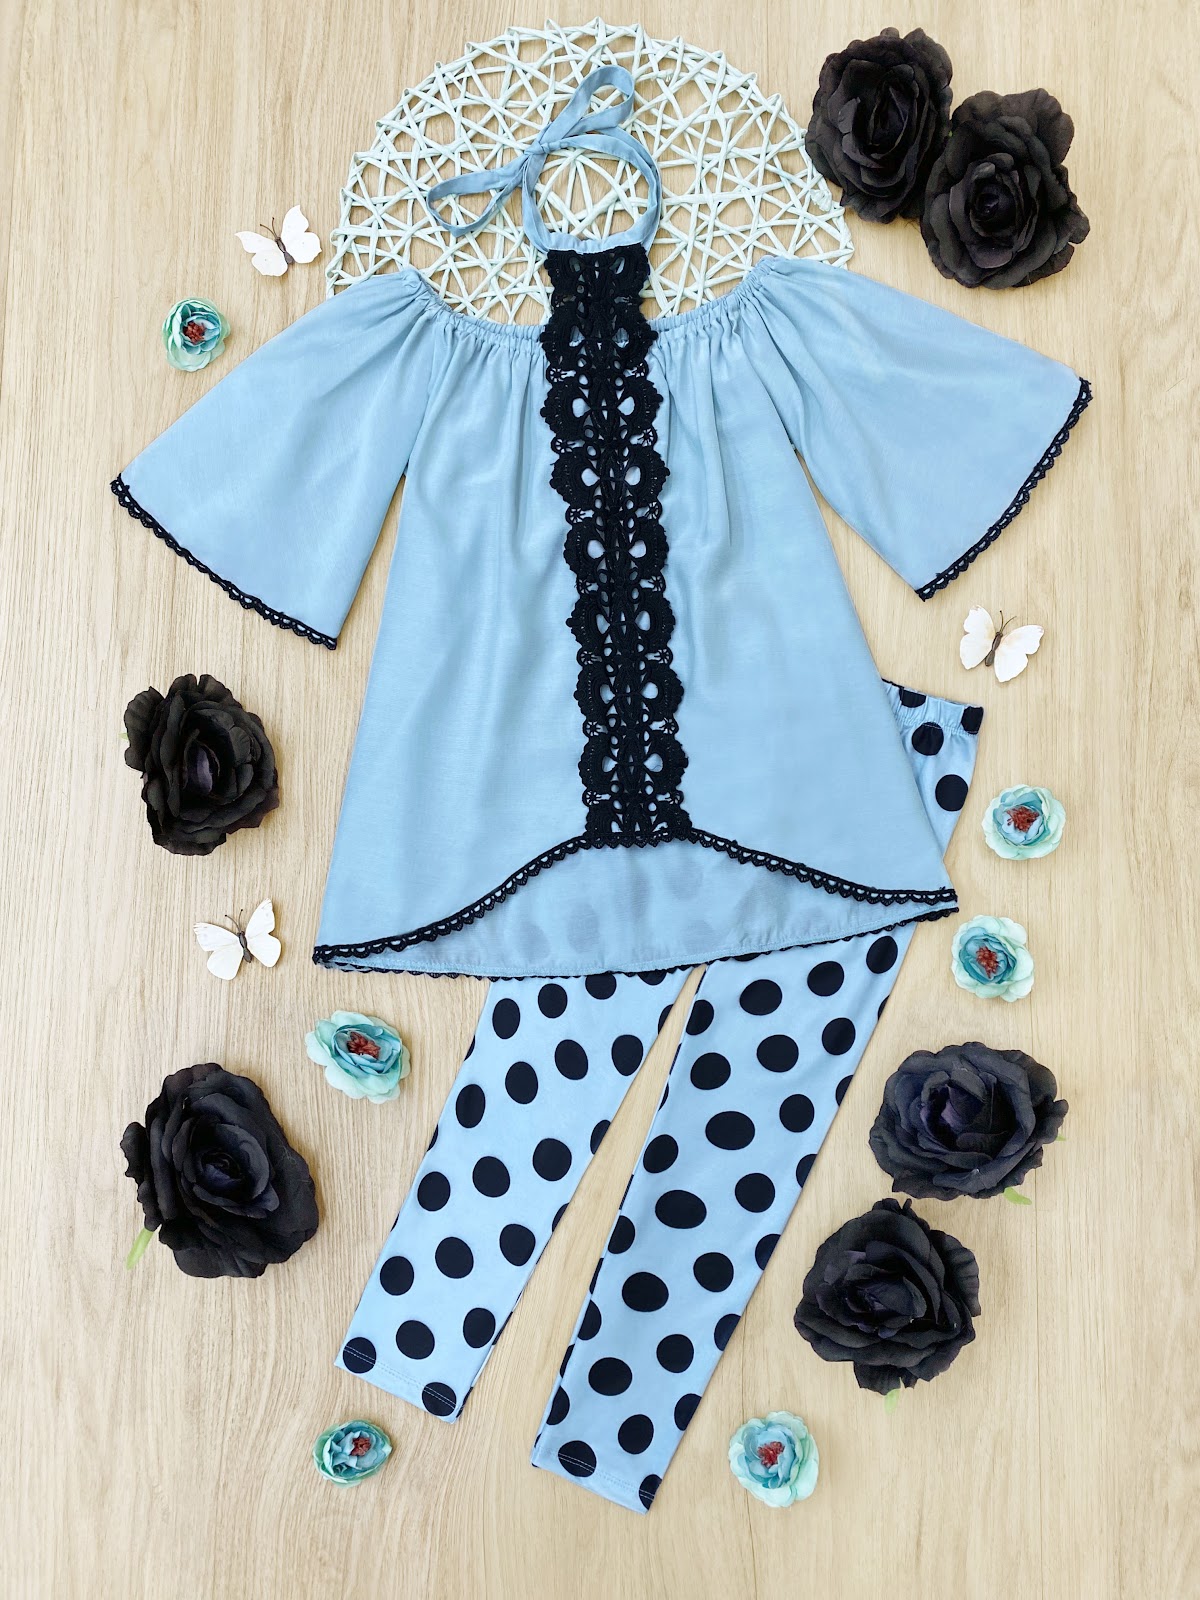 Toddler Spring Outfit | Mint Lace Accent Tunic & Polka Dot Legging Set